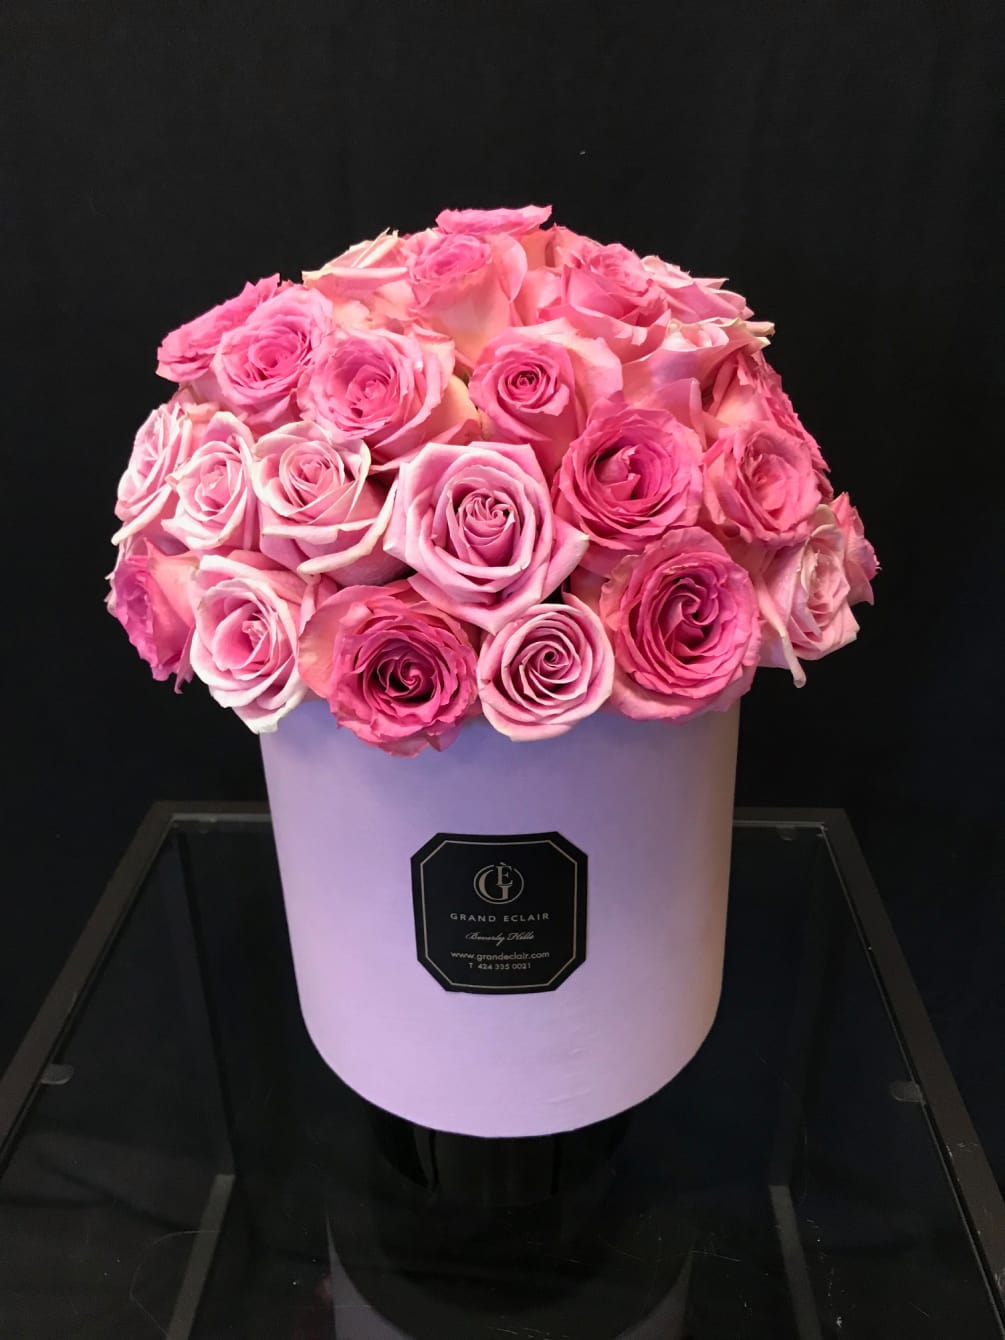 All shades of pink roses in a delicate arrangement 